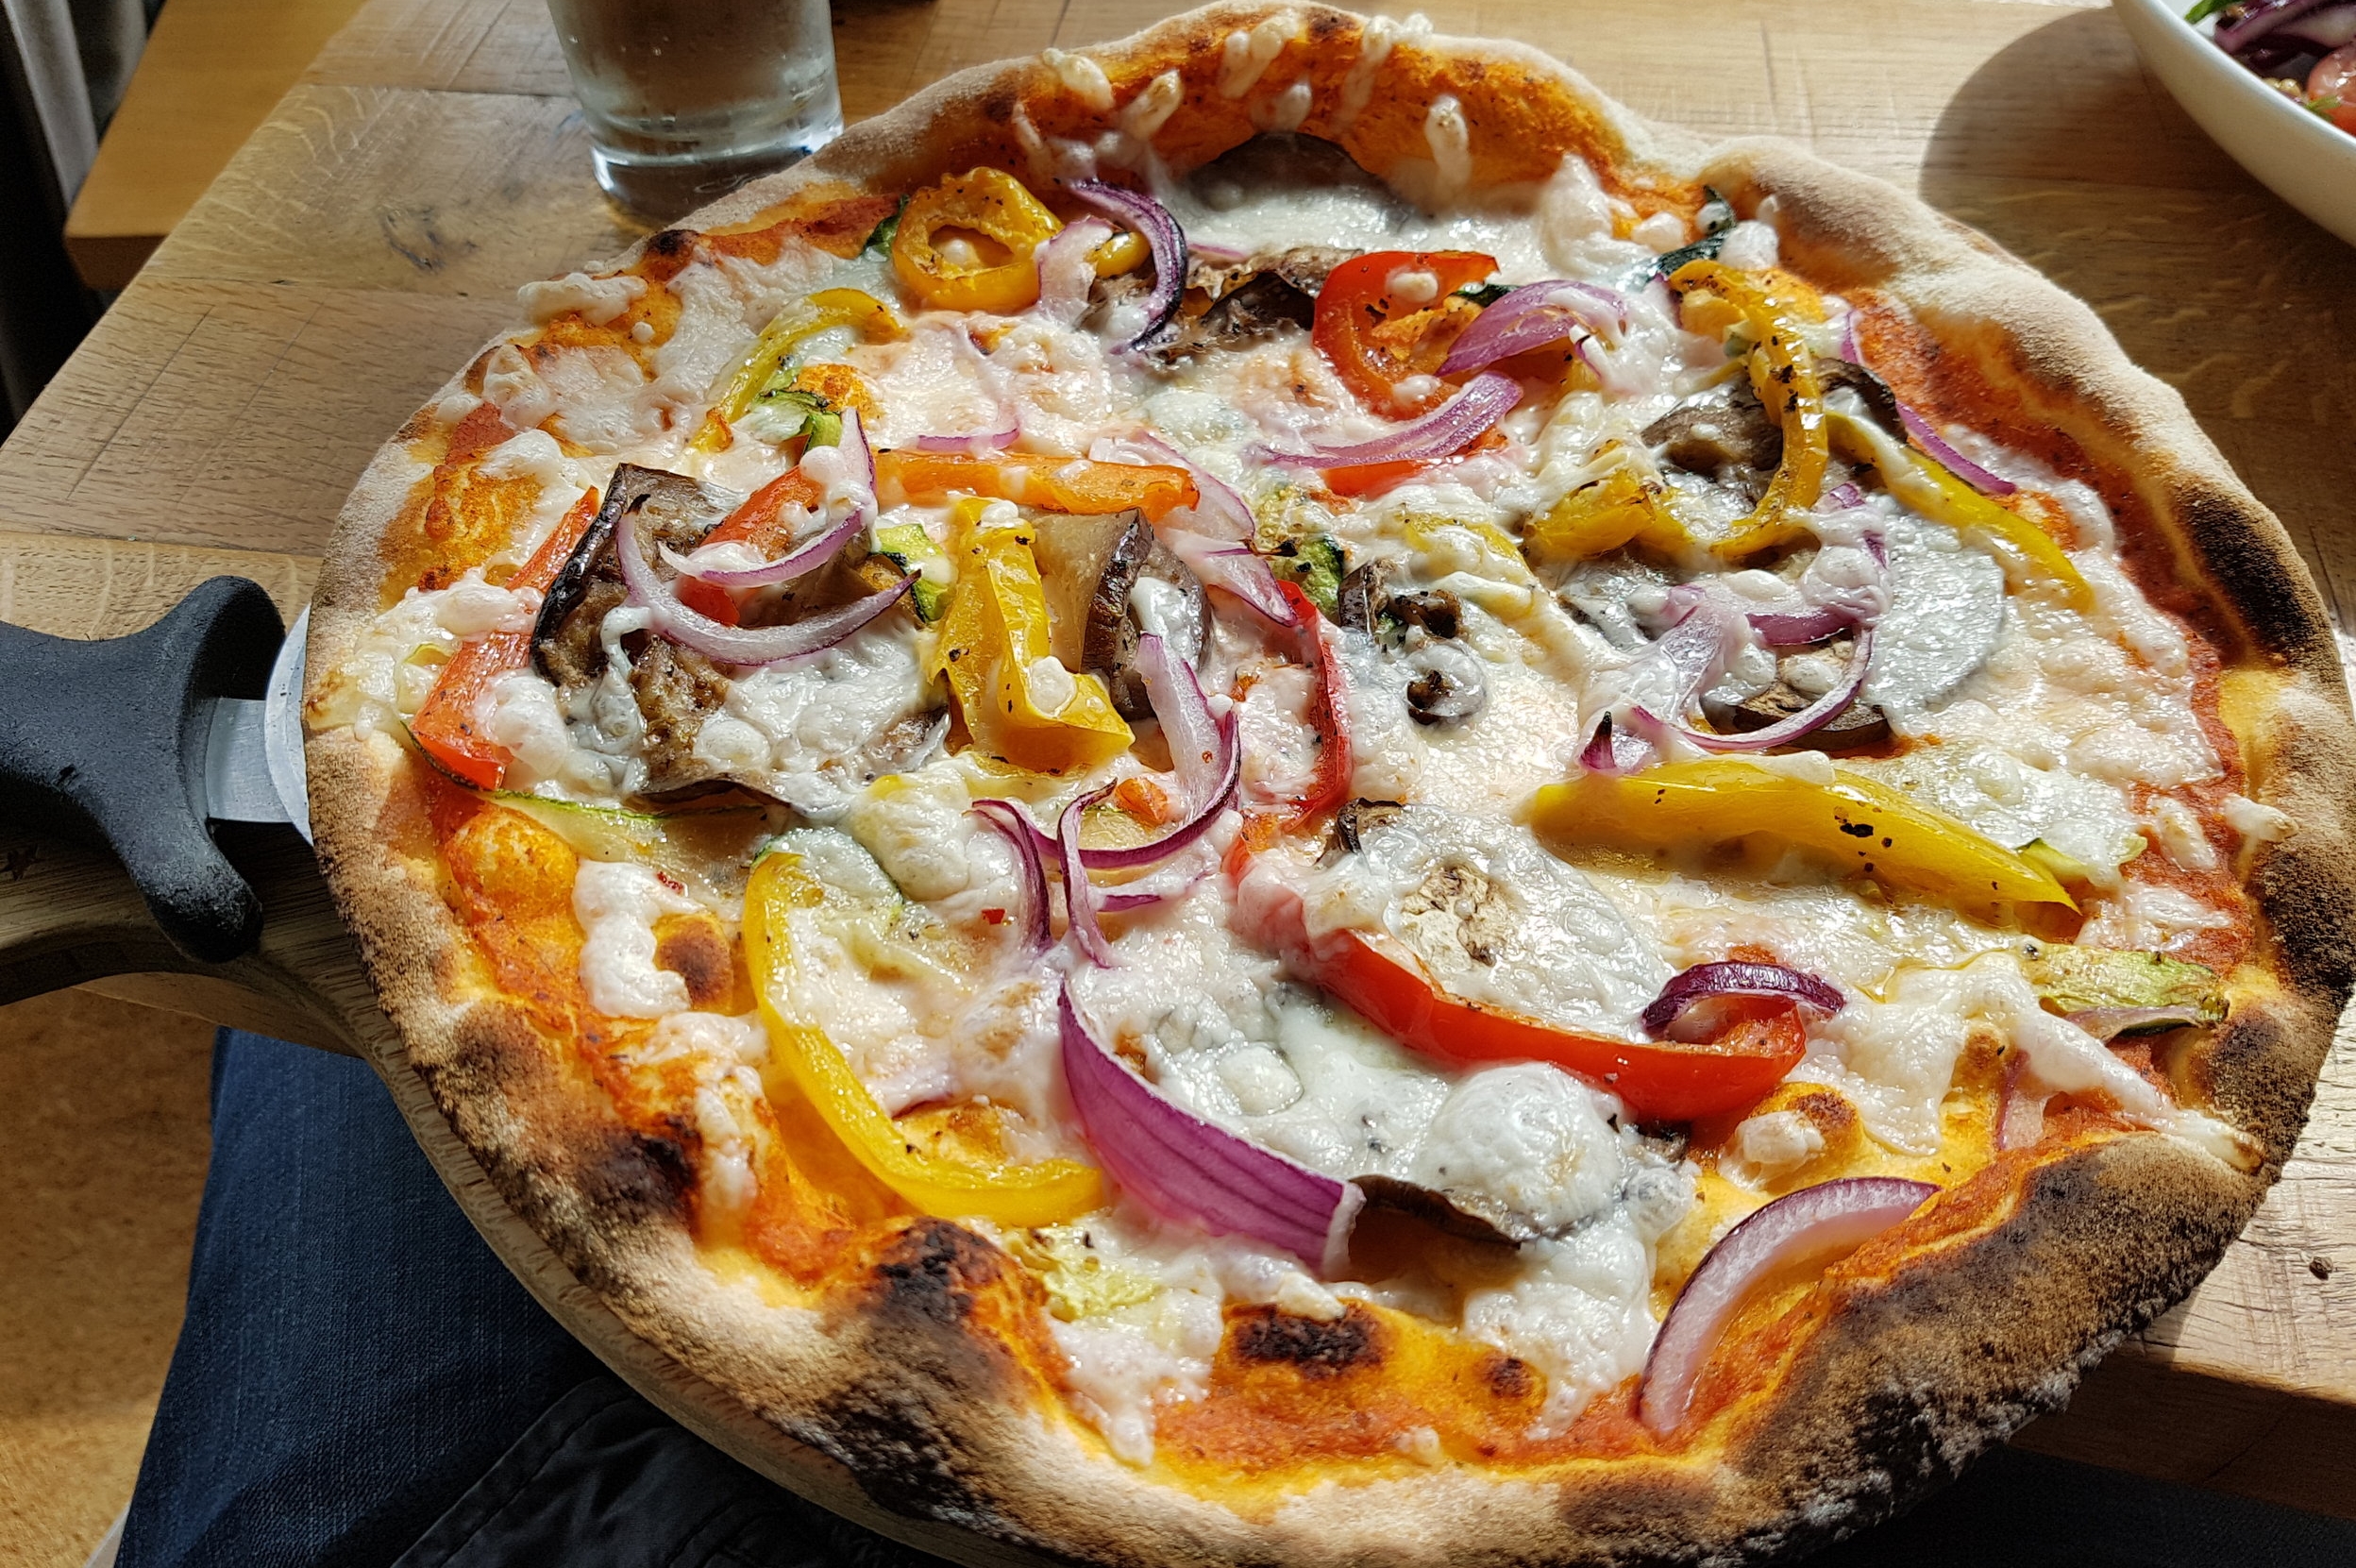 The Good Life | roasted courgette, aubergine, roasted red & yellow peppers, with onion, vegan cheese and fresh basil